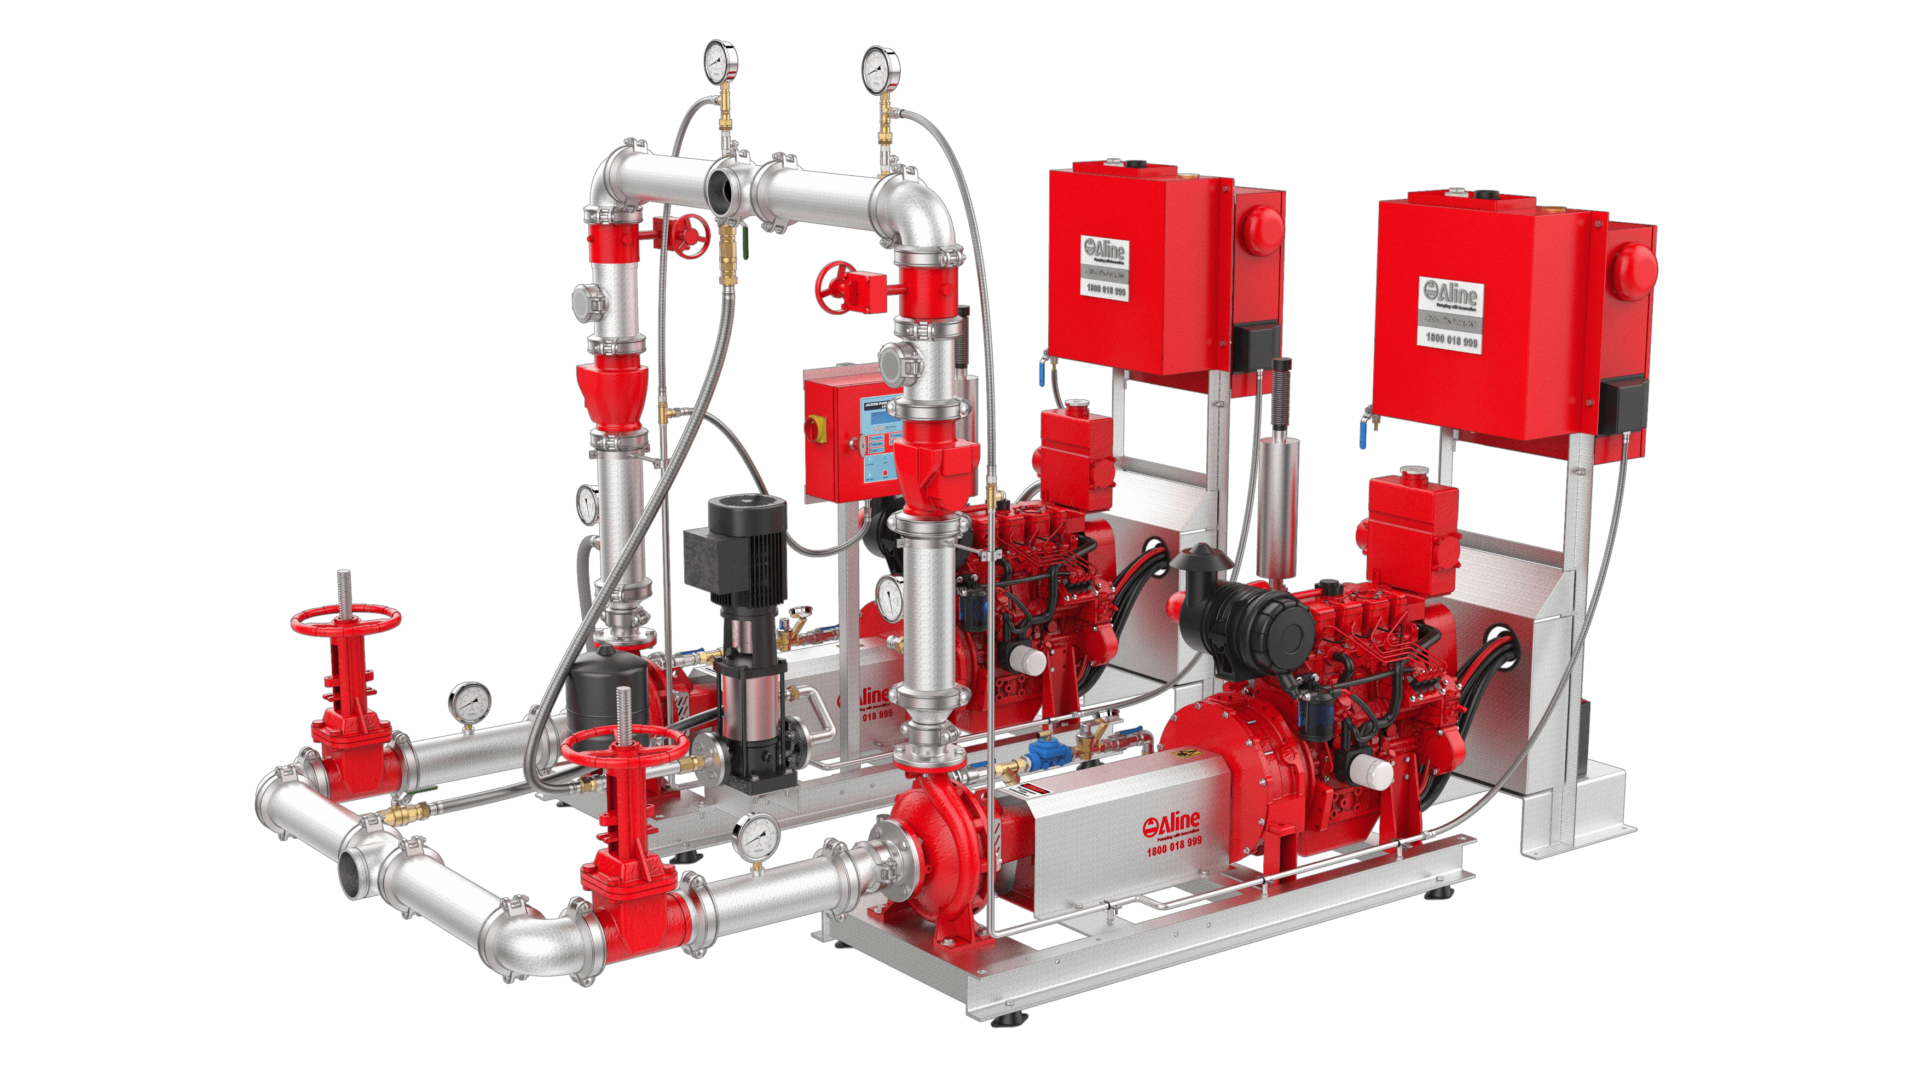 Dual diesel fire pumps in sturdy design for enhanced fire protection